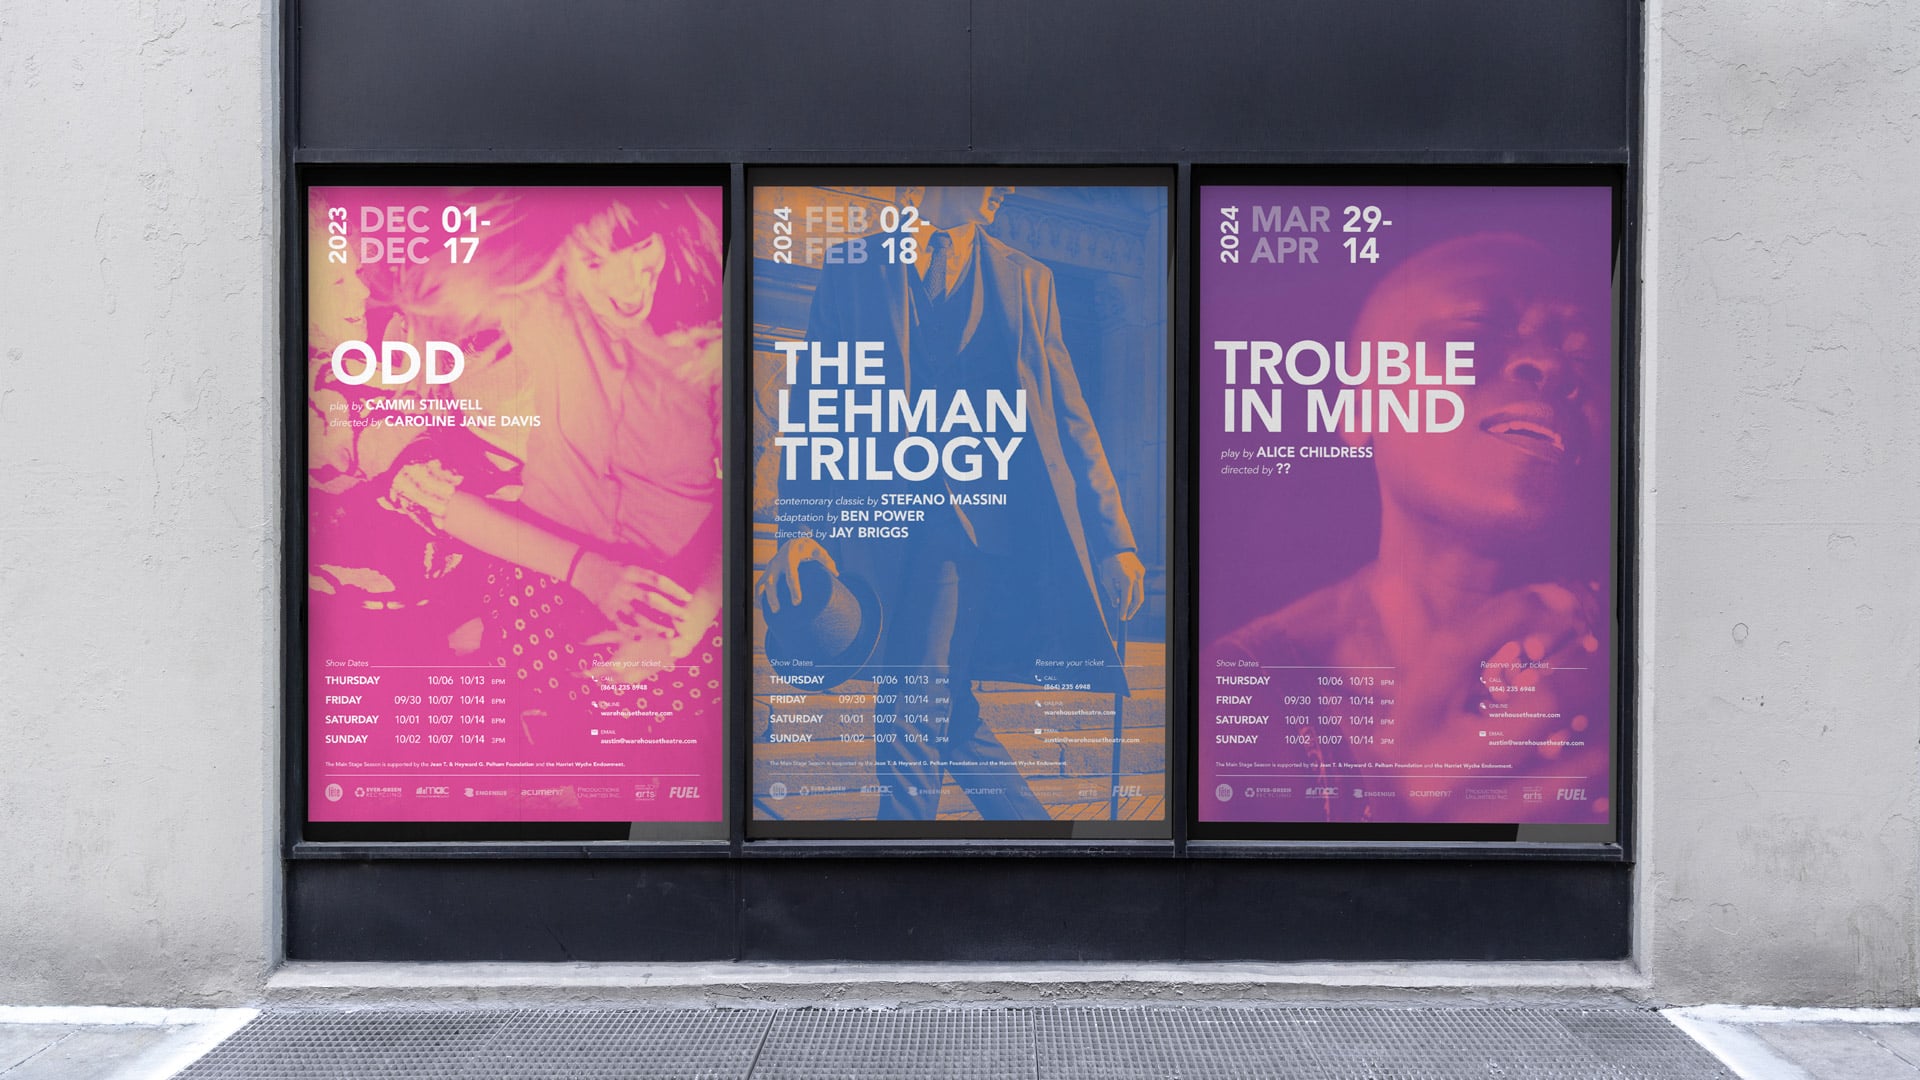 Warehouse Theatre Posters